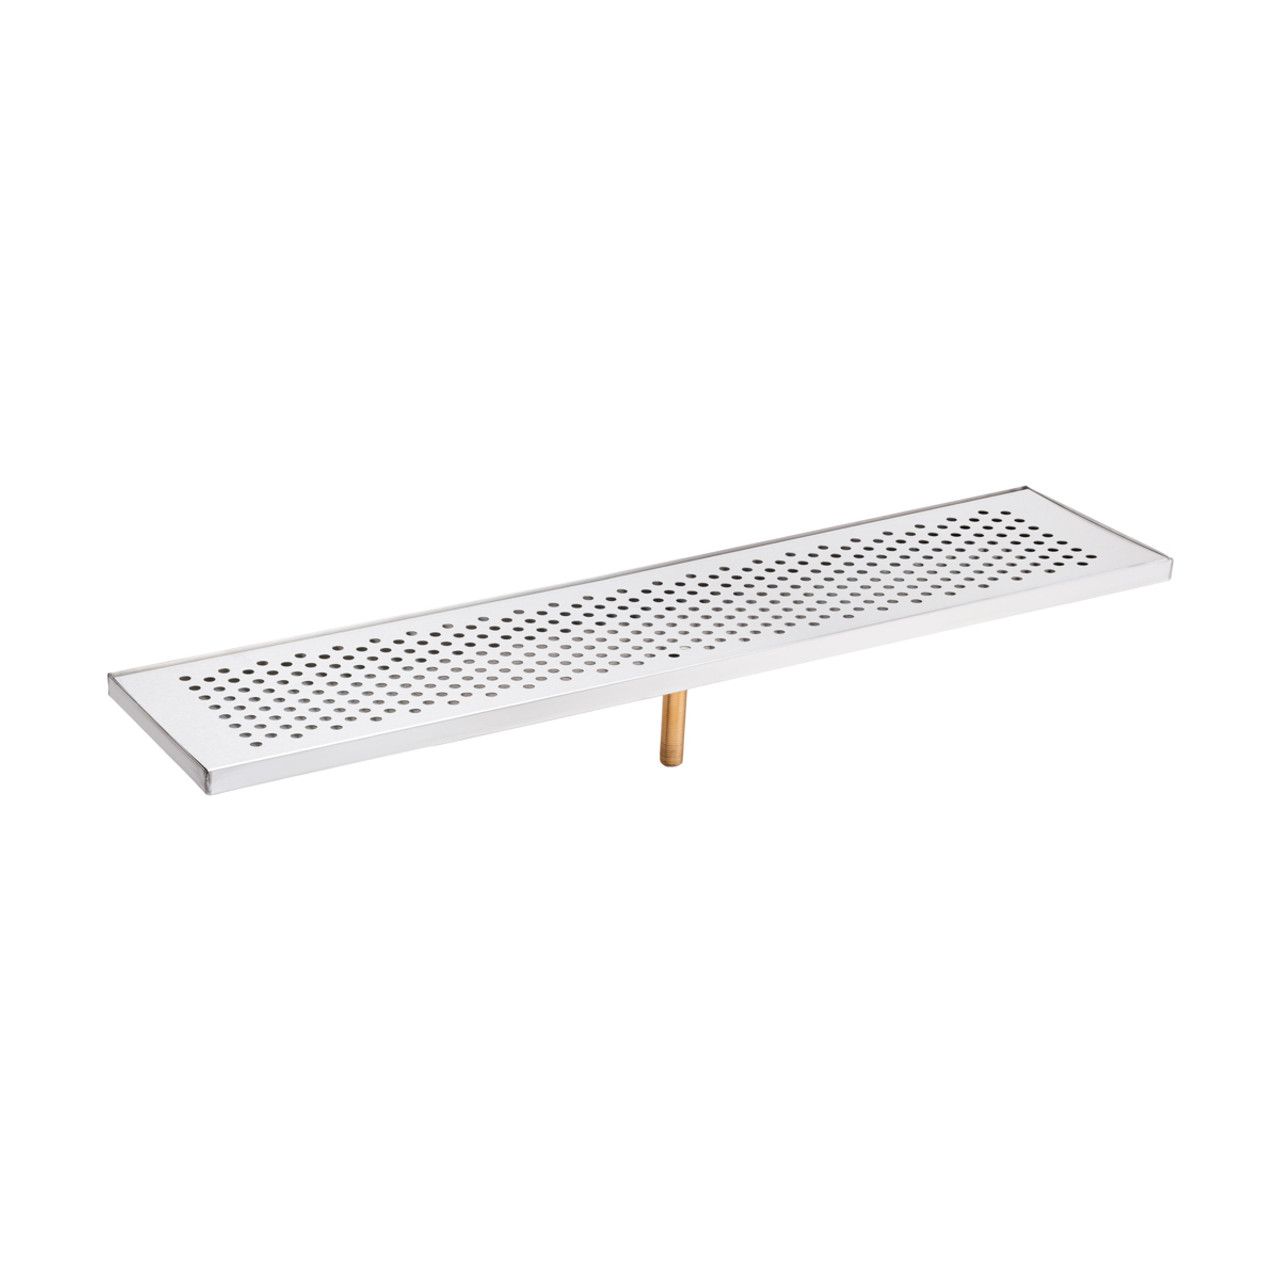 8 Wide Countertop Drip Tray - With Drain